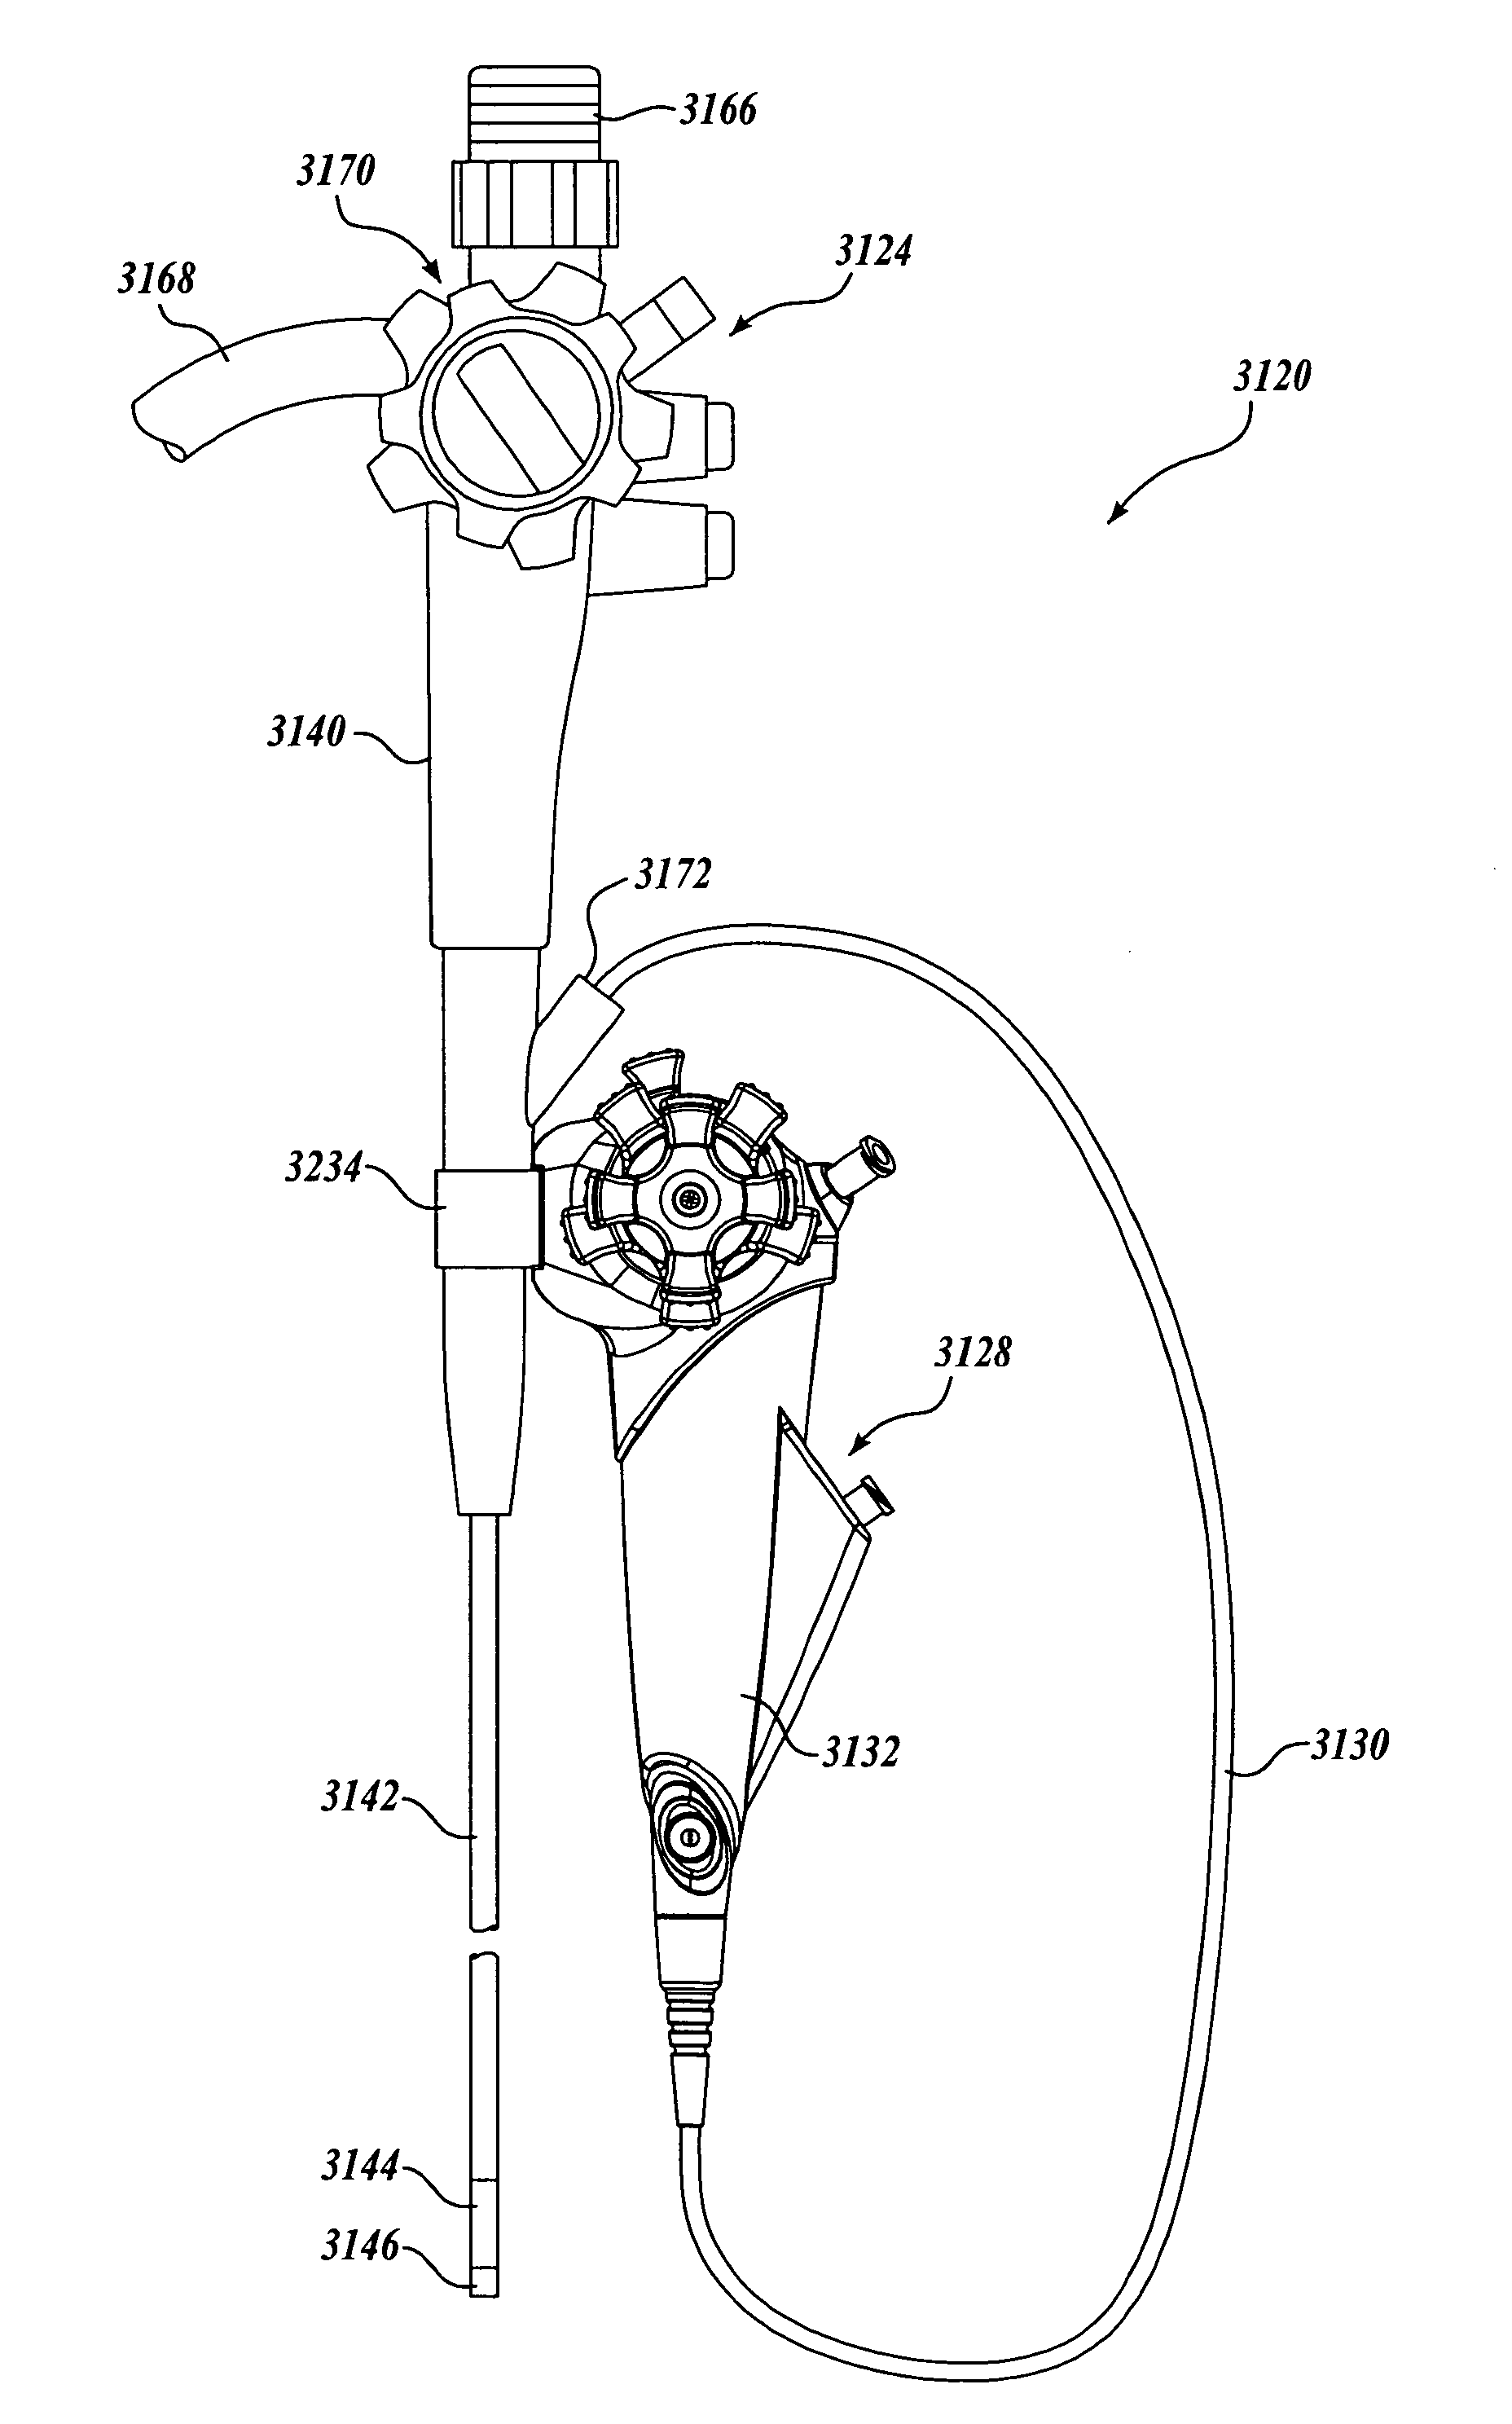 Medical visualization system with endoscope and mounted catheter